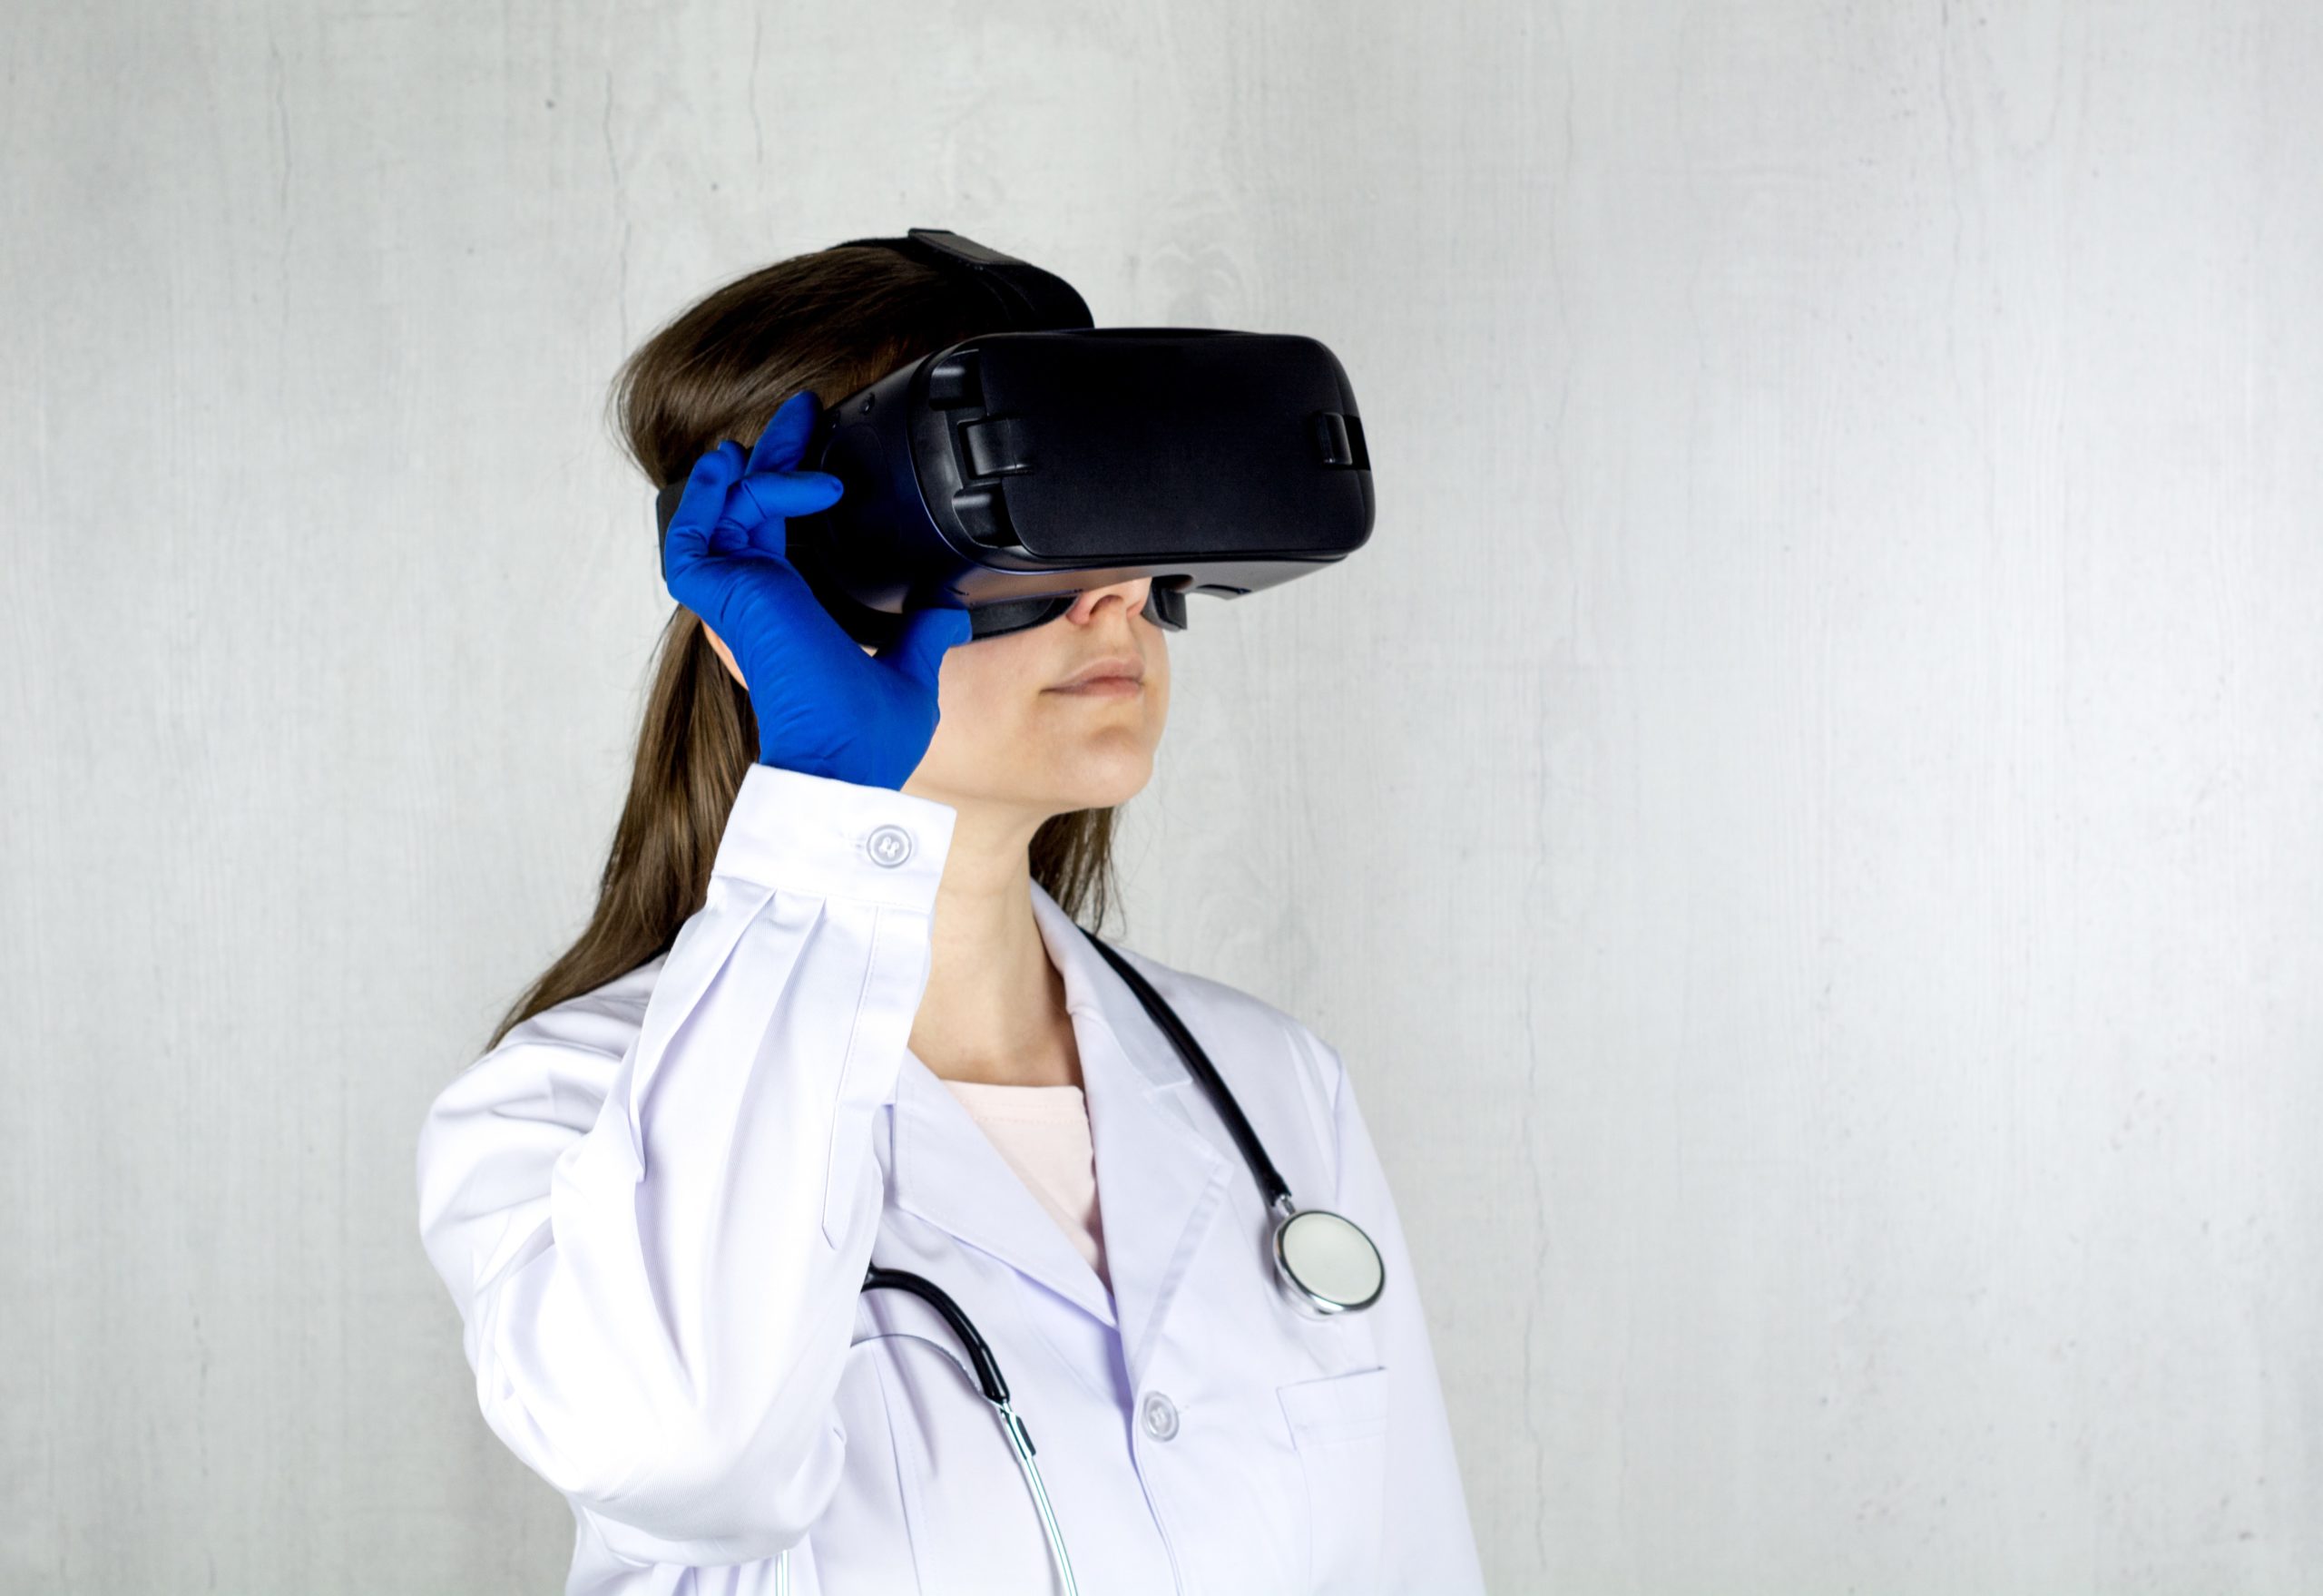 Potential use case of AR and VR in education, in particular medical field